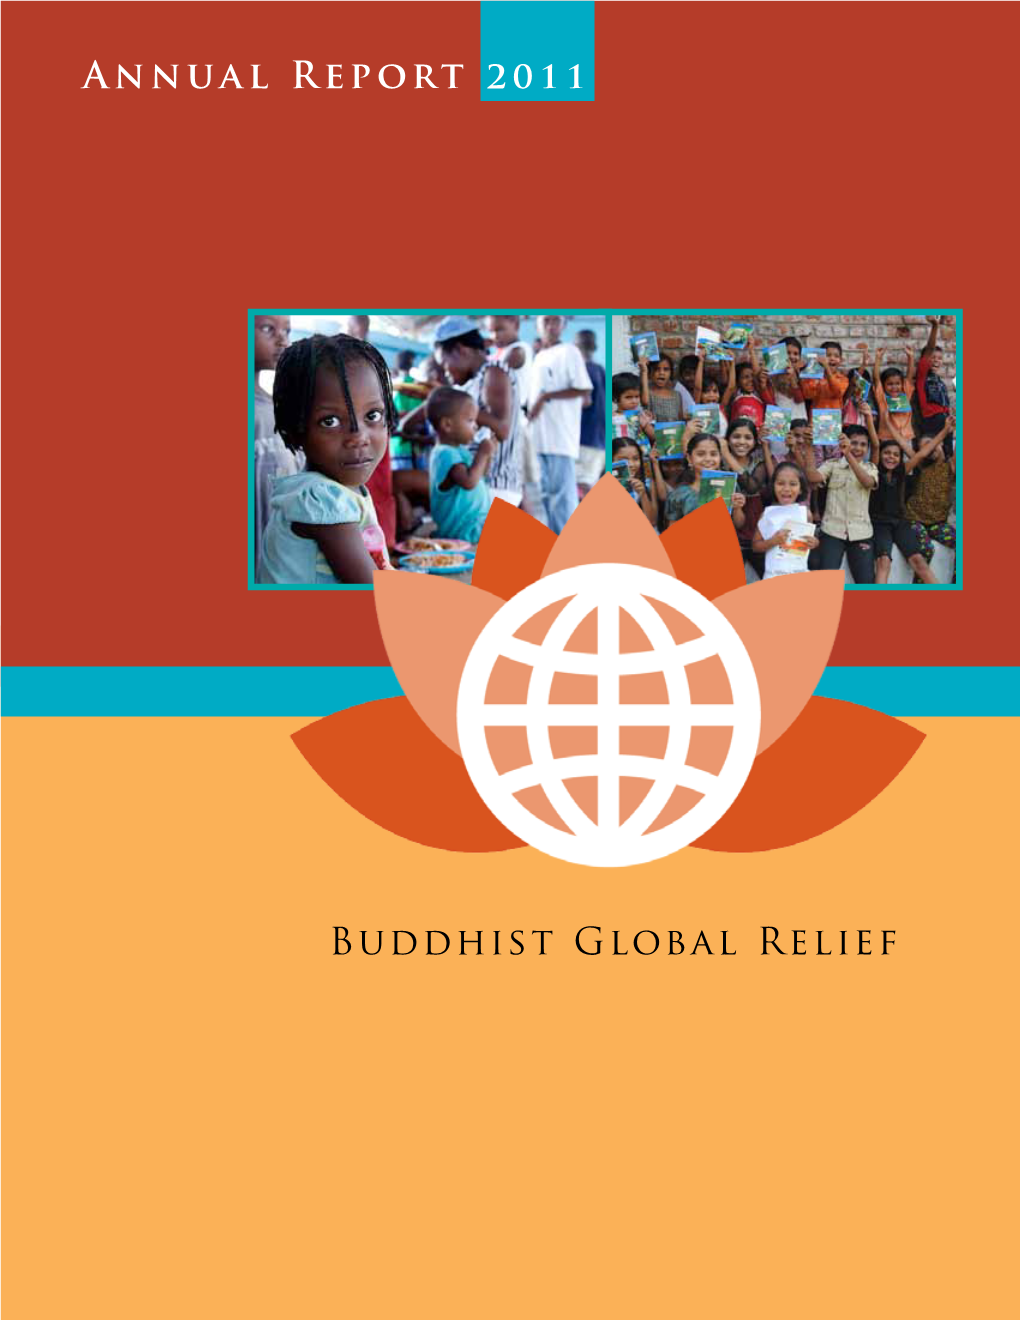 Annual Report 2011 Buddhist Global Relief